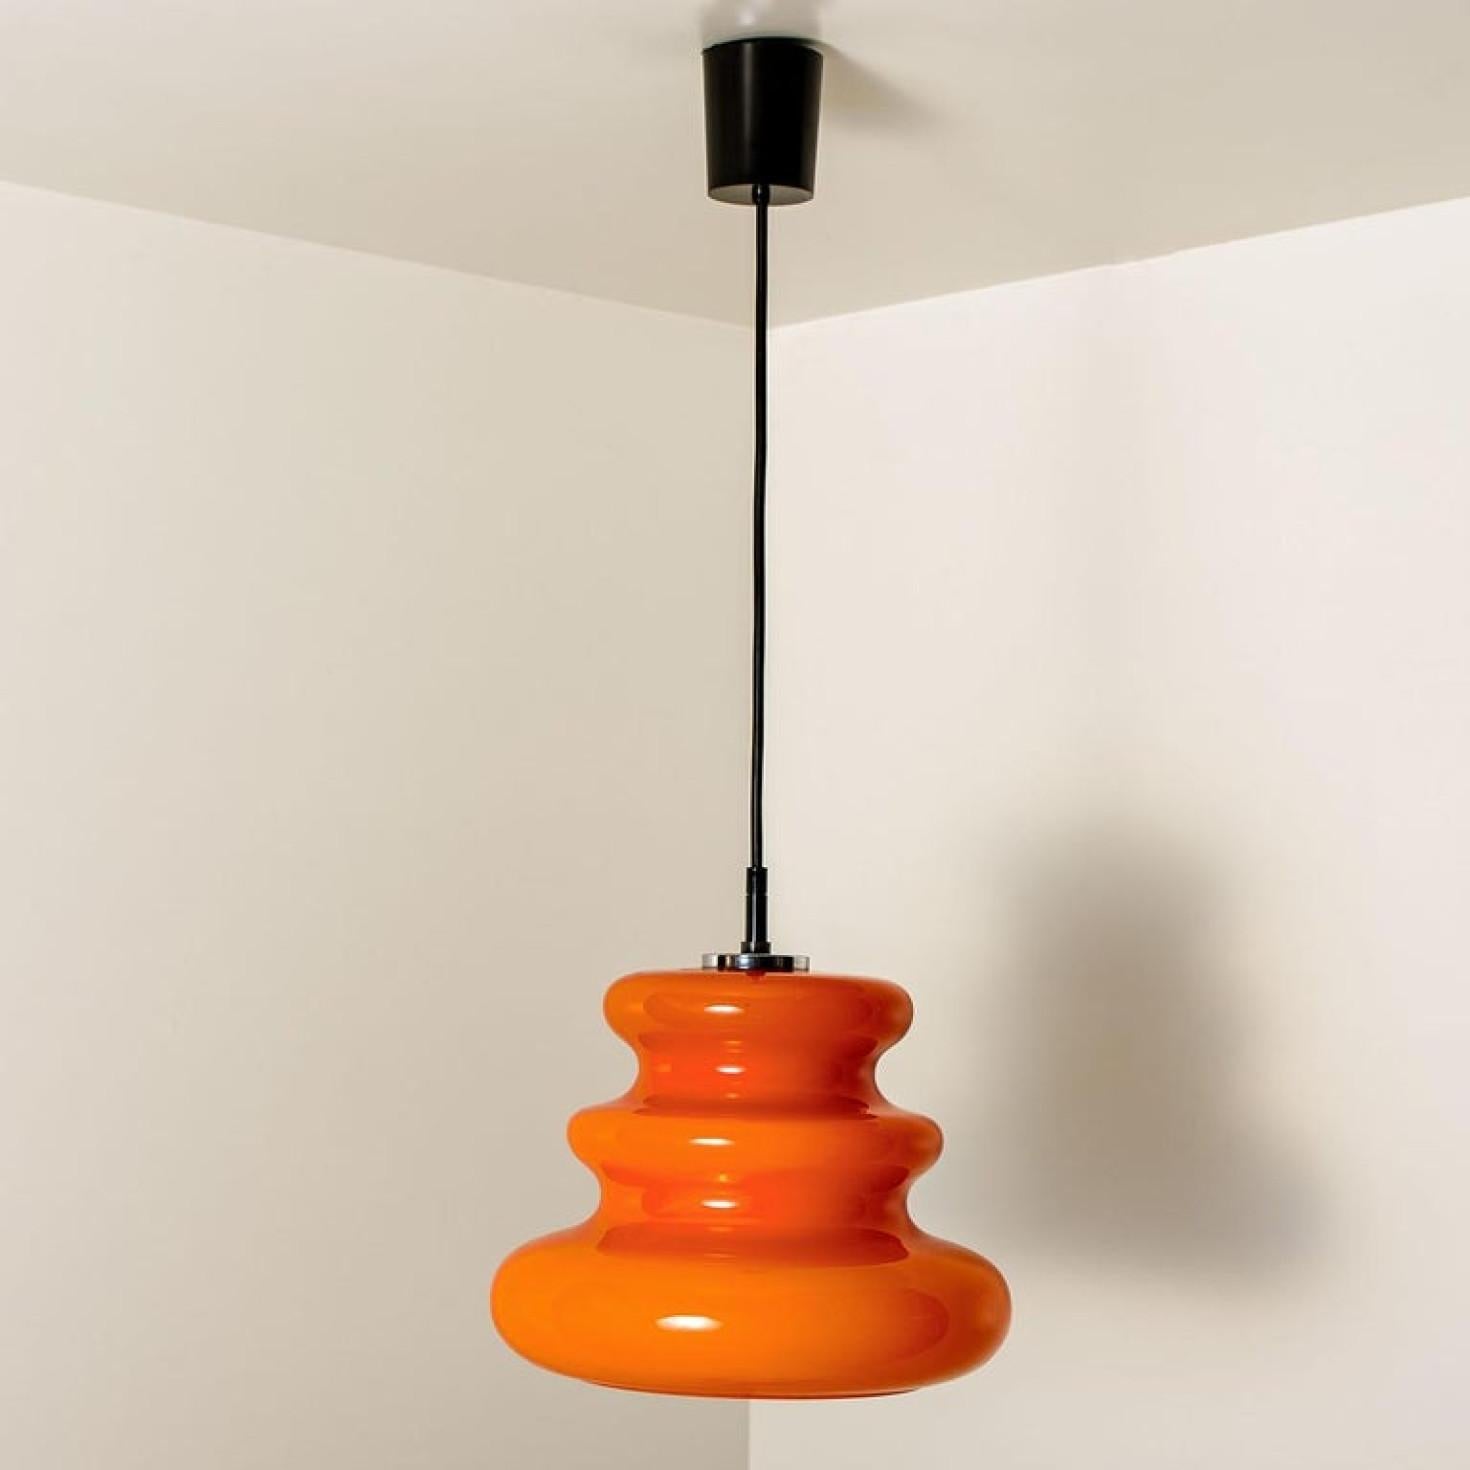 Blown Glass One of the Two Orange Peill & Putzler Pendant Lights, 1970s For Sale